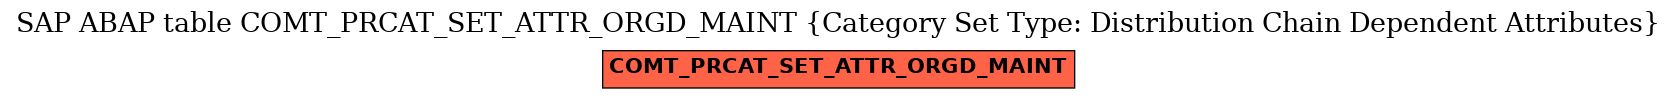 E-R Diagram for table COMT_PRCAT_SET_ATTR_ORGD_MAINT (Category Set Type: Distribution Chain Dependent Attributes)